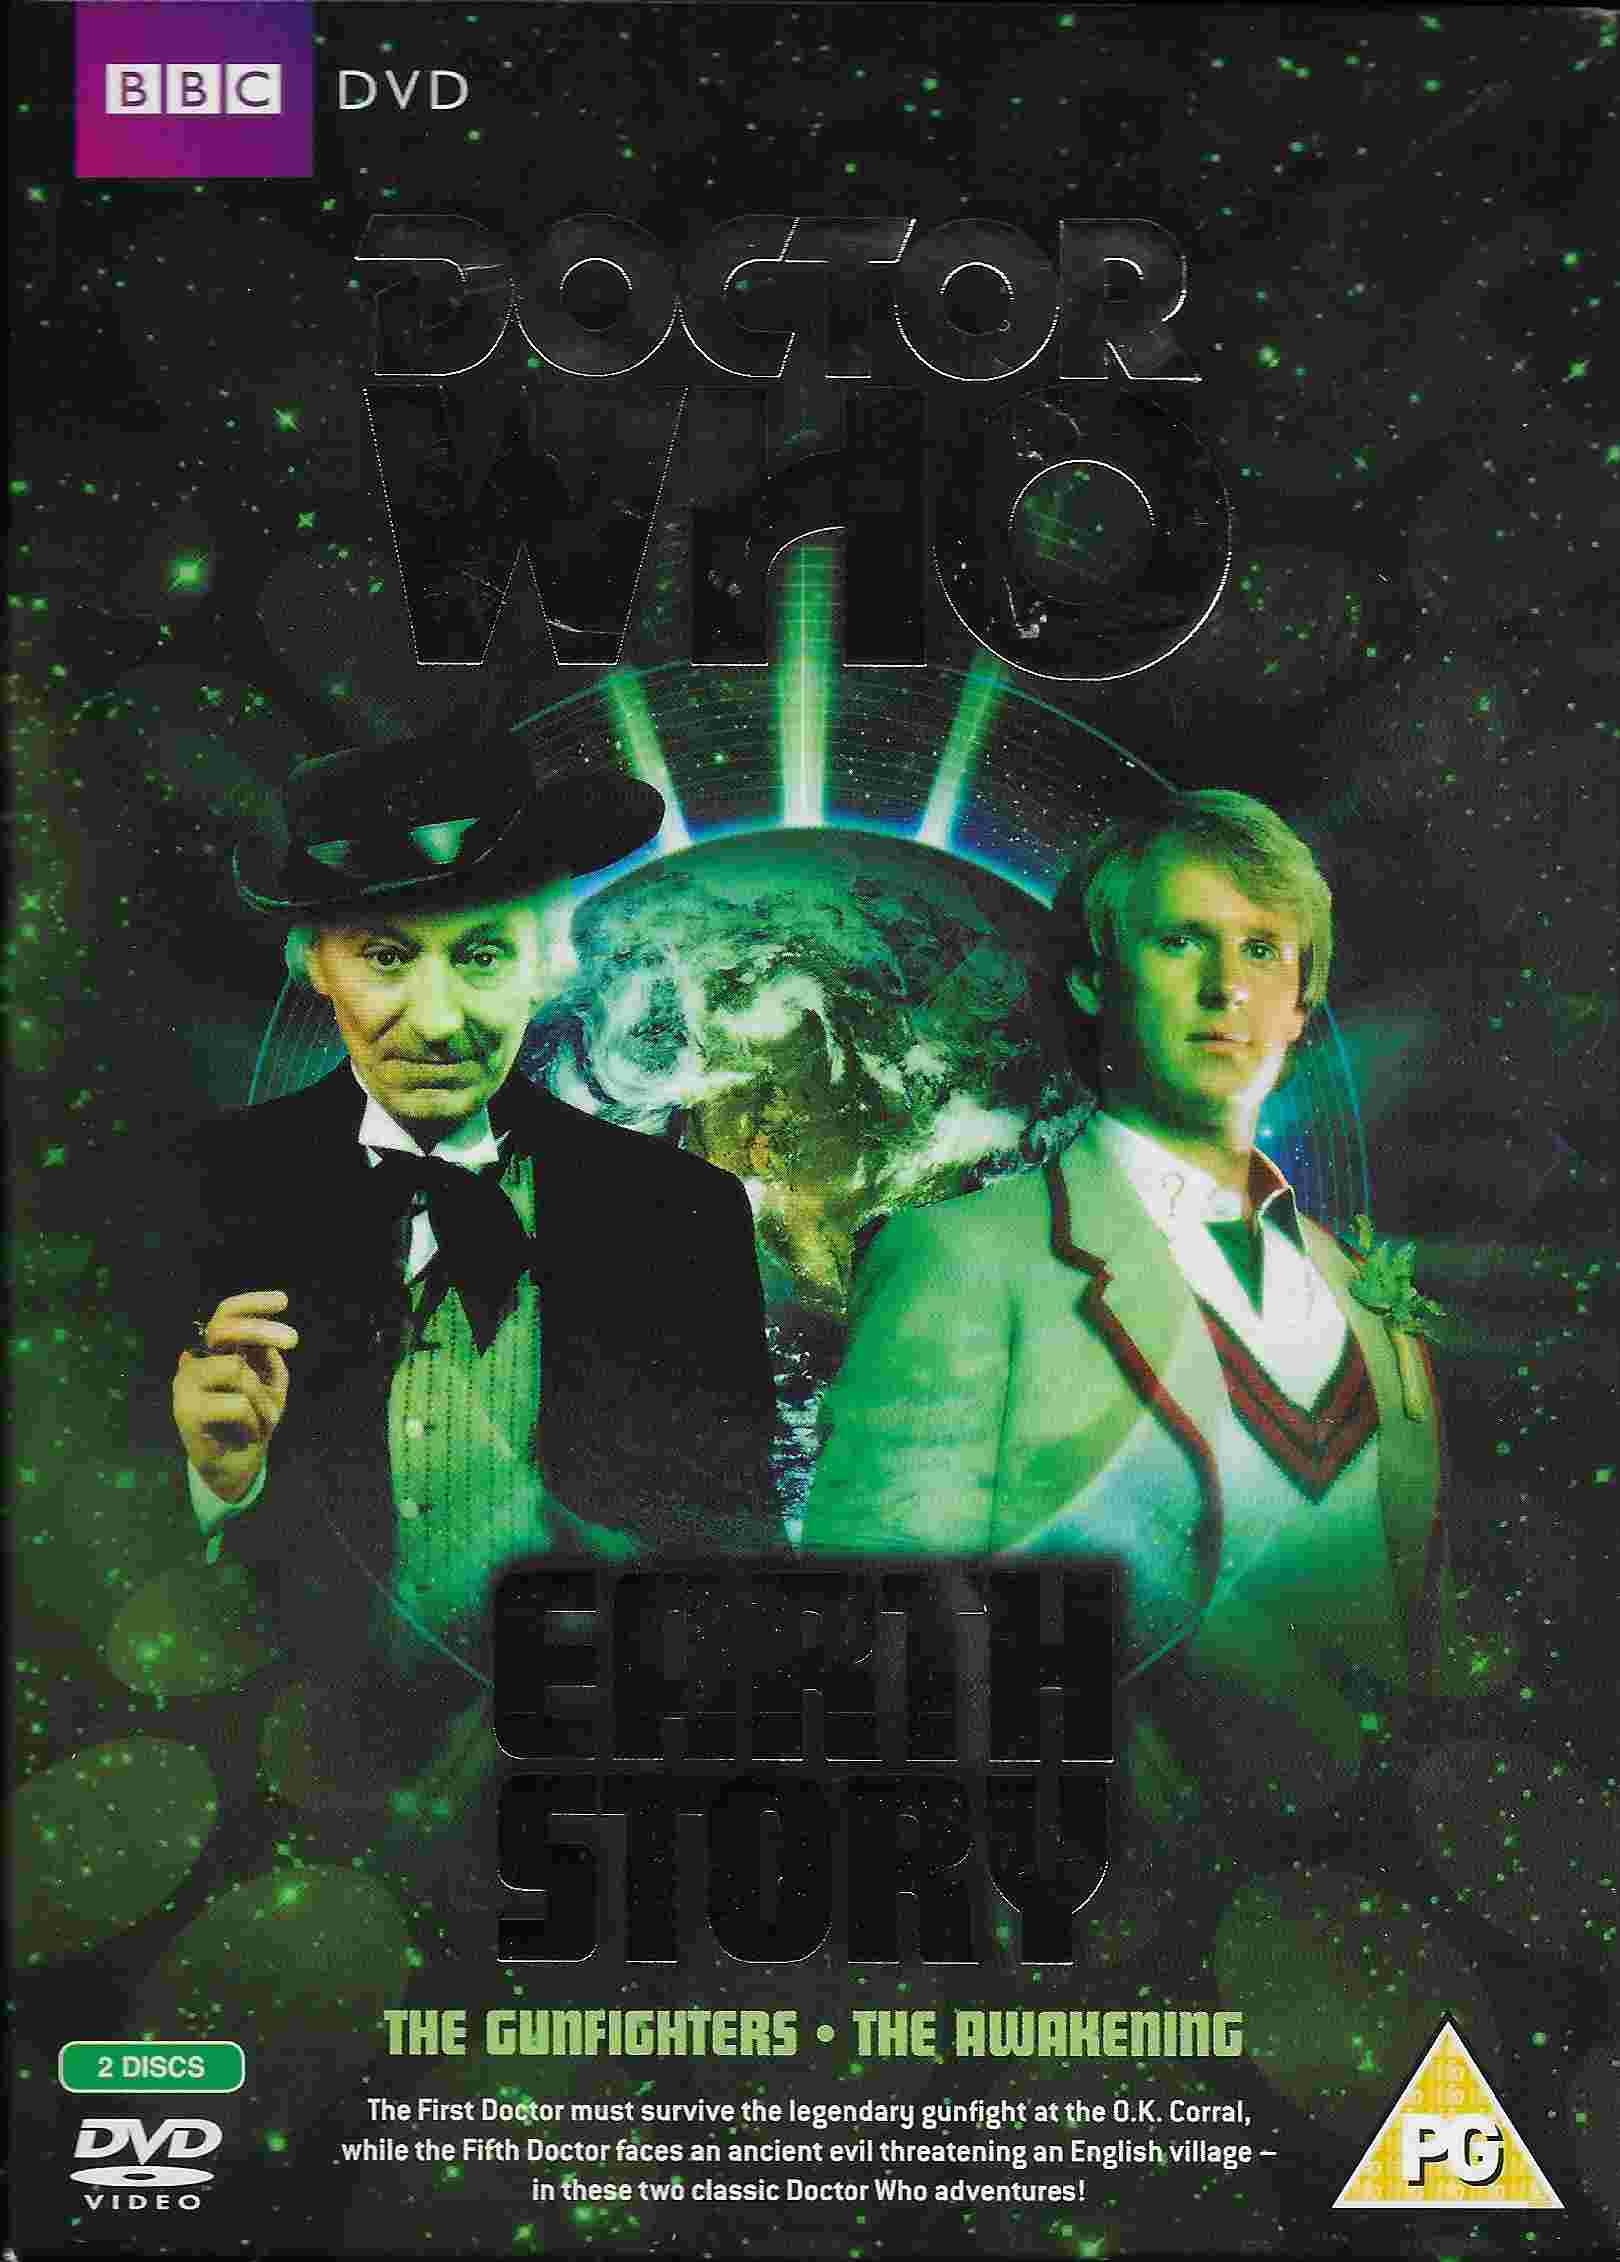 Picture of BBCDVD 3380 Doctor Who - Earth story by artist Donald Cotton / Malcolm Hulke from the BBC records and Tapes library